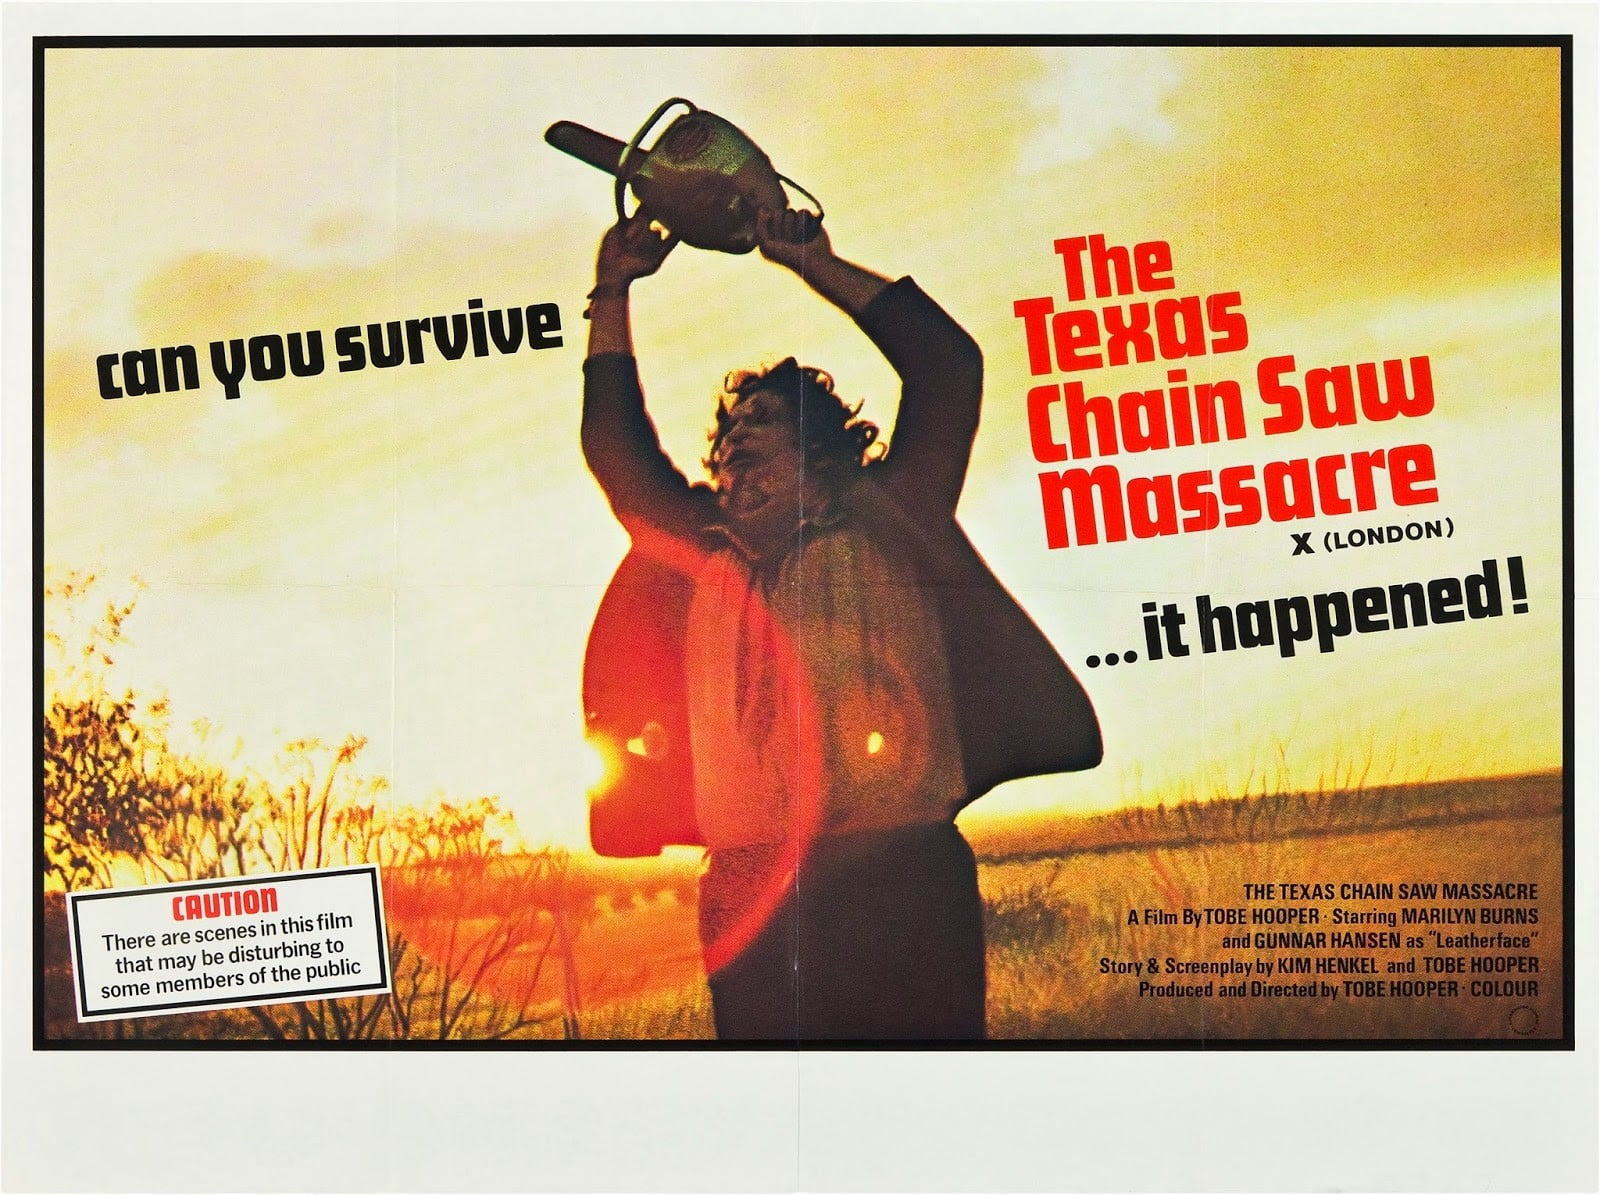 3840x2160 resolution | The Texas Chain Saw Massacre poster, The Texas ...